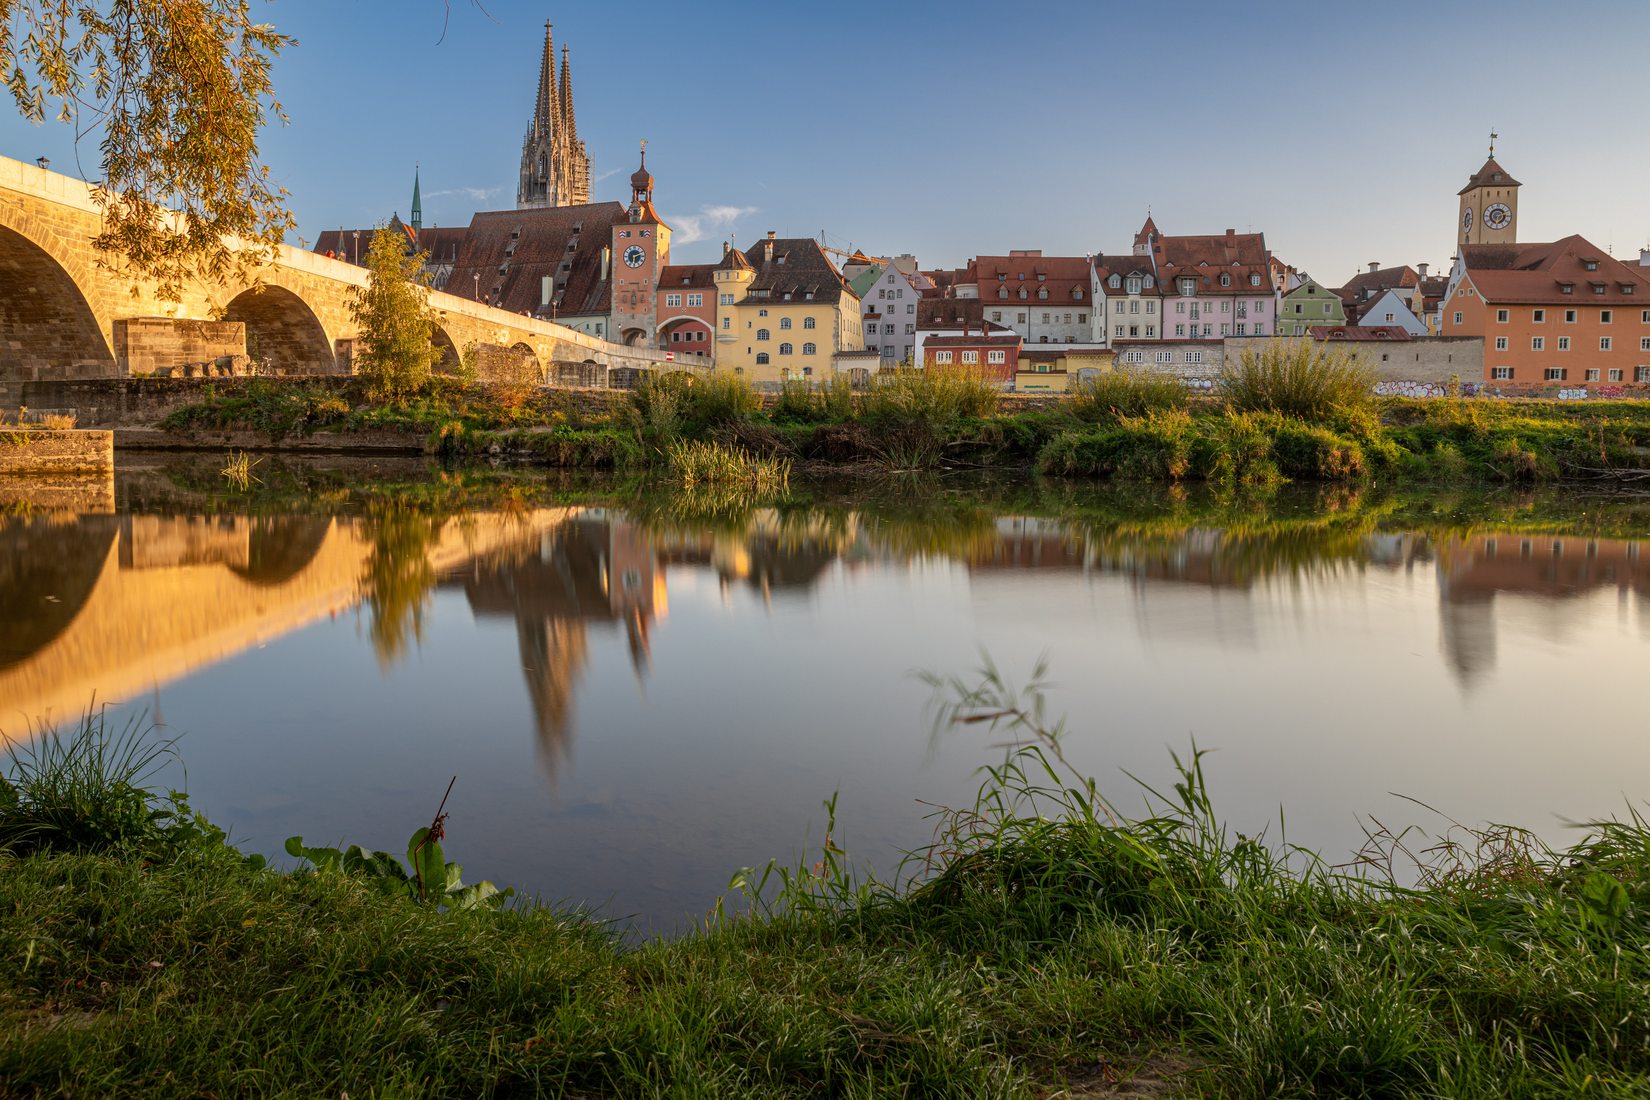 View of Regensburg from 'Oberer Wöhrd' island, Germany